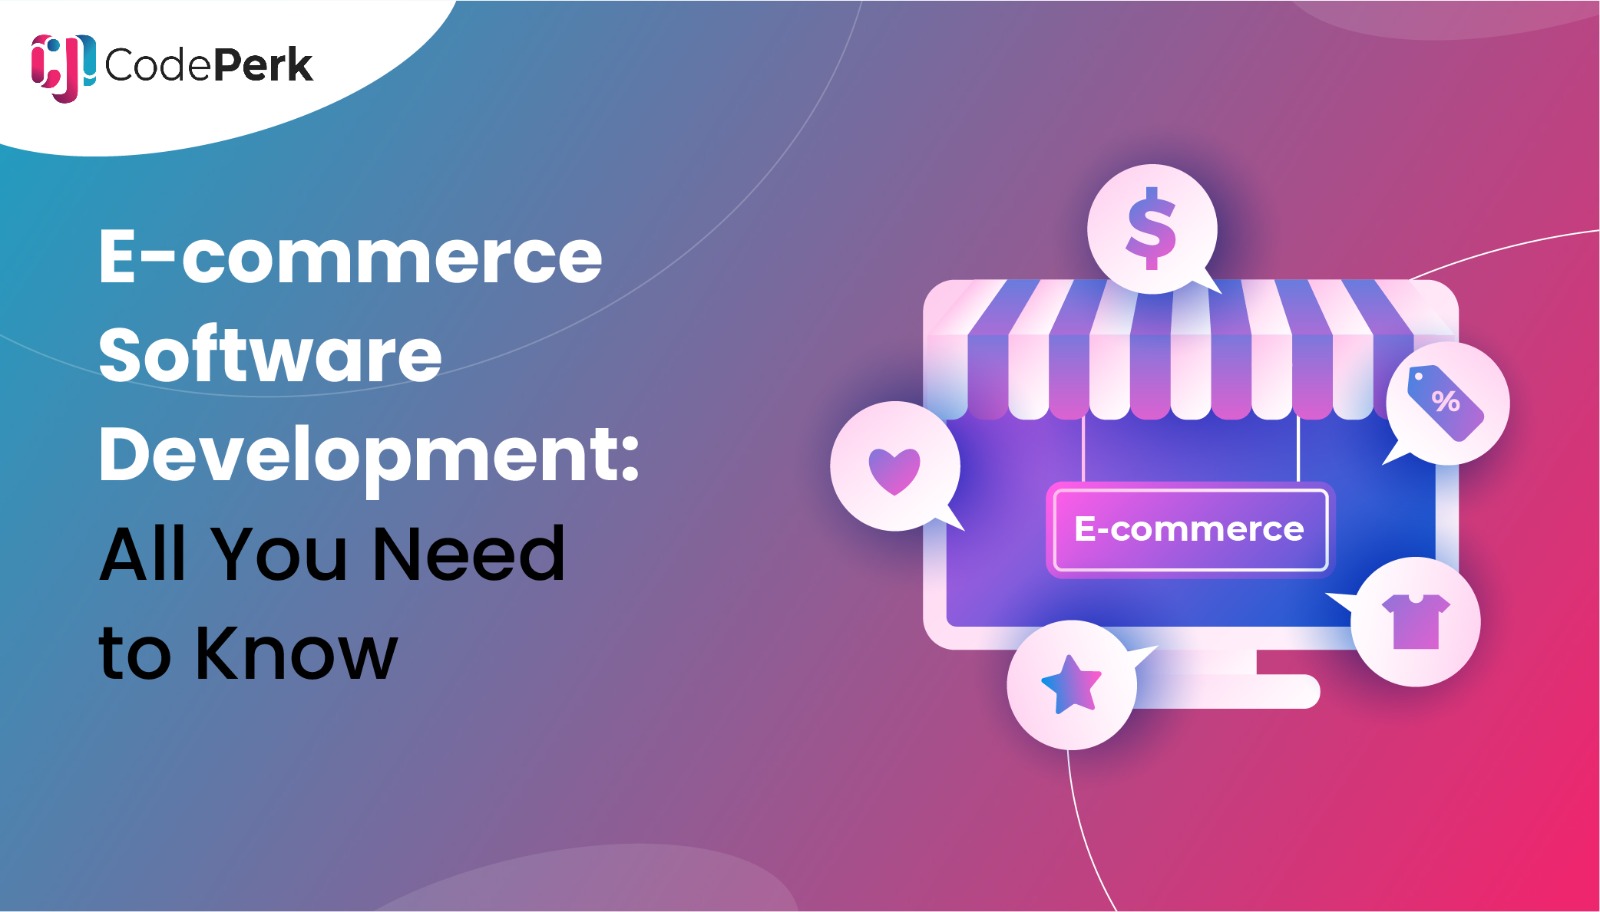 E-commerce Software Development All You Need to Know